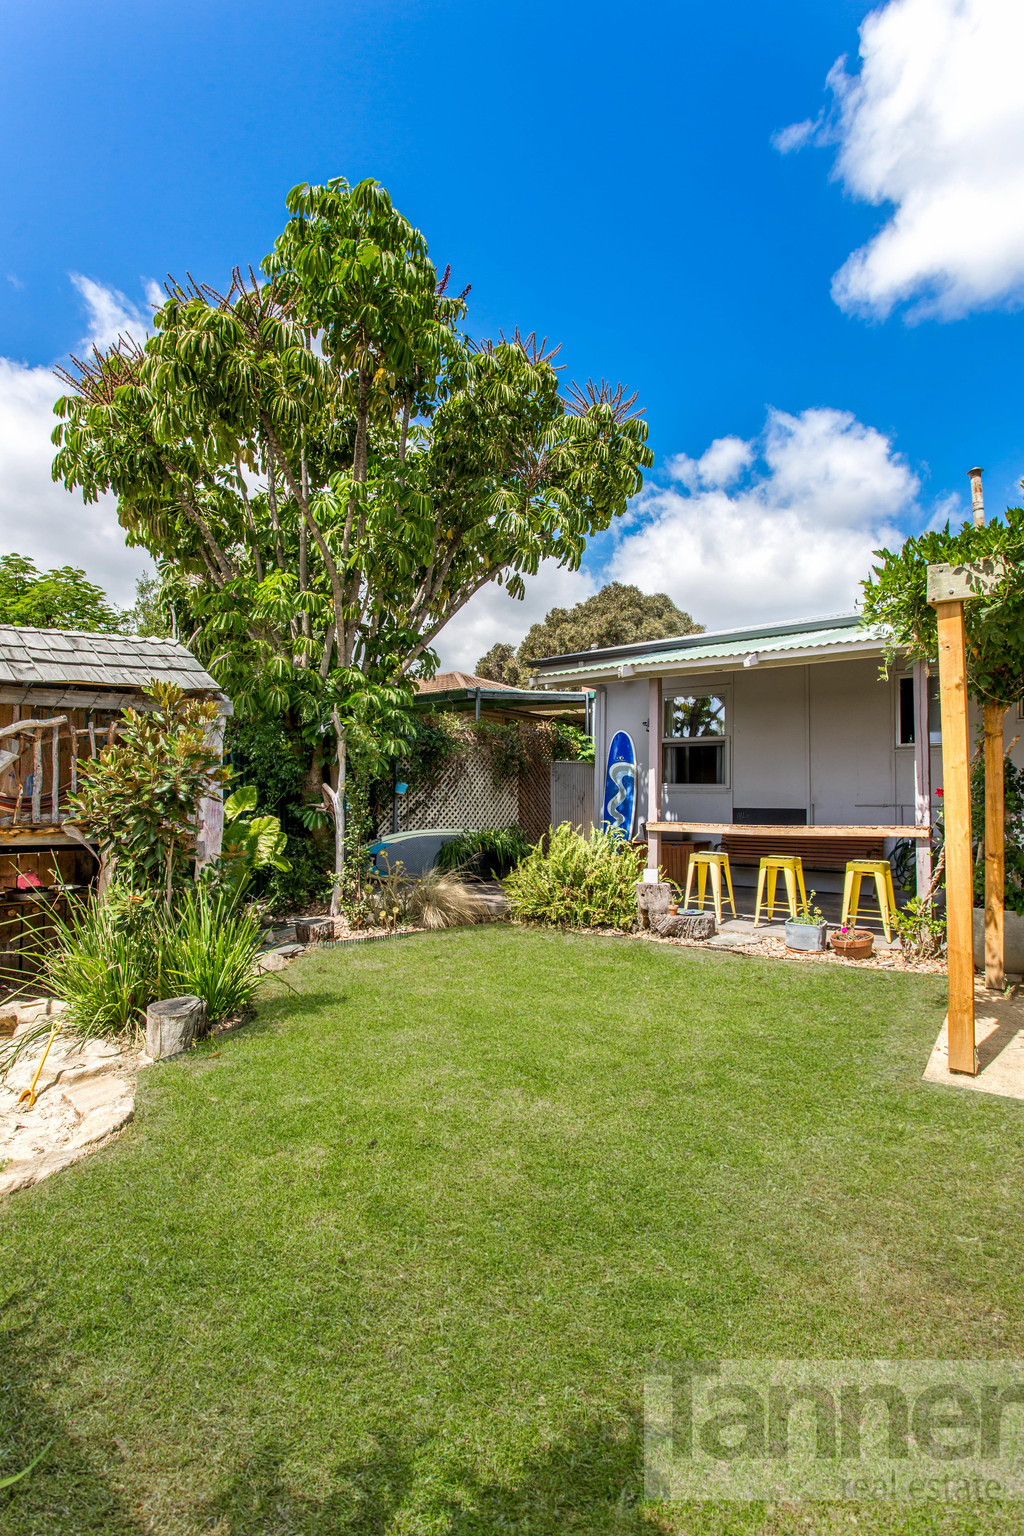 Relax & Unwind in this little oasis – tucked away only minutes from the beach